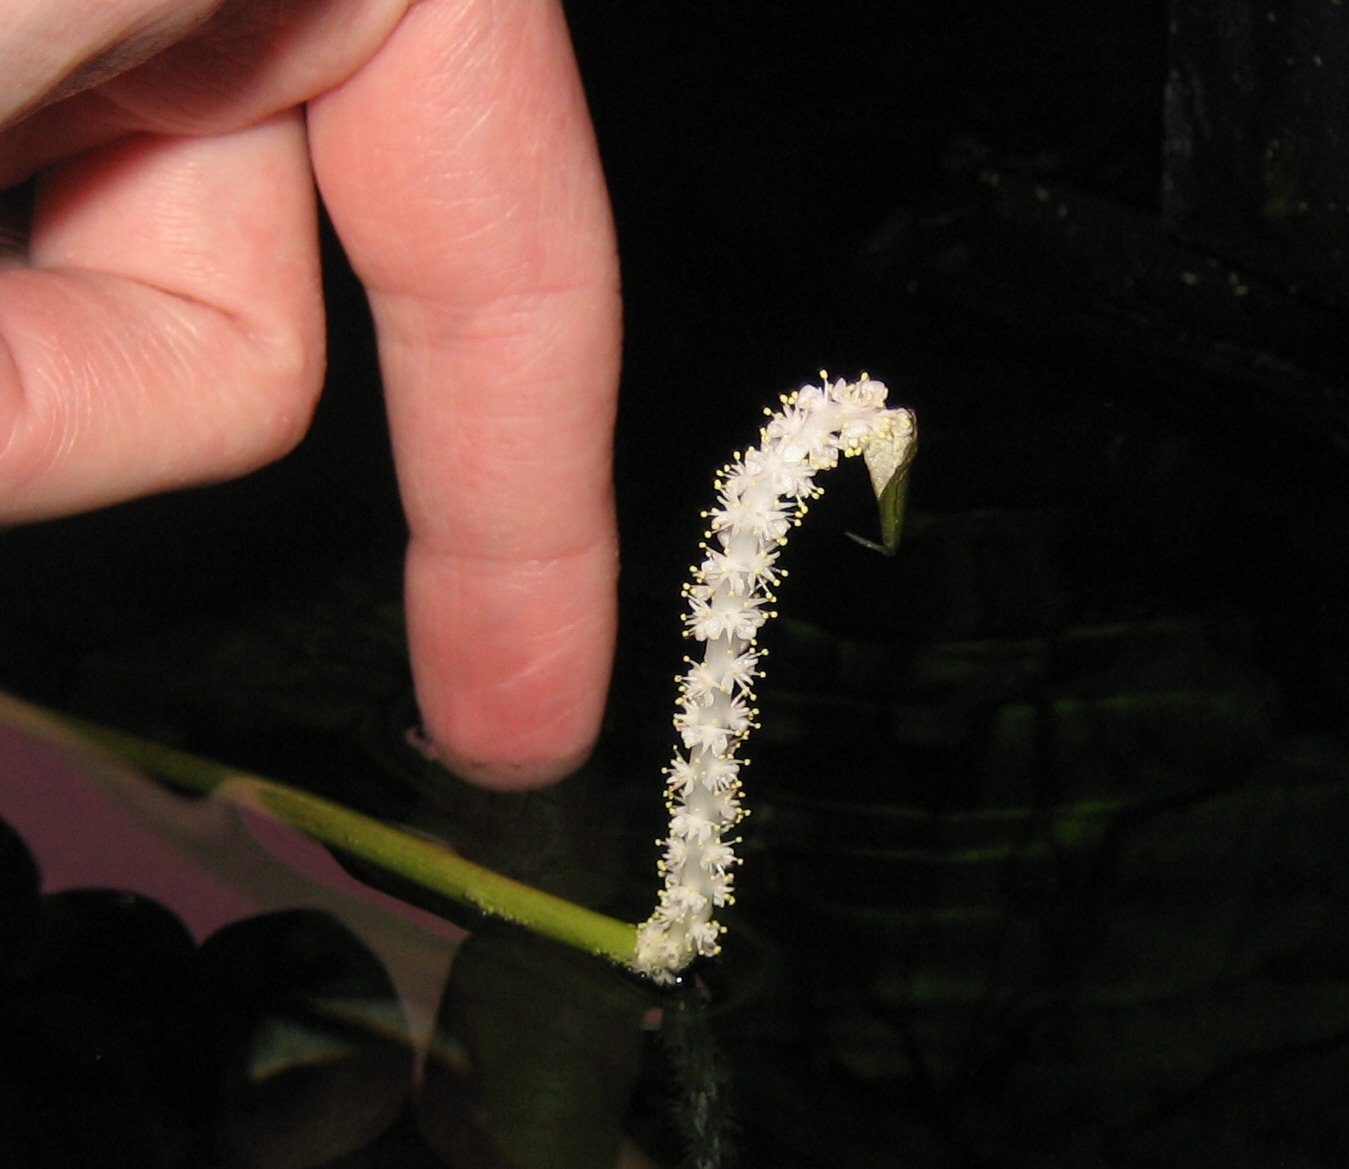 Aponogeton crispus flower under 1.2 WPG.  Its the 2nd time the plant has flowered. (Finger added for scale)